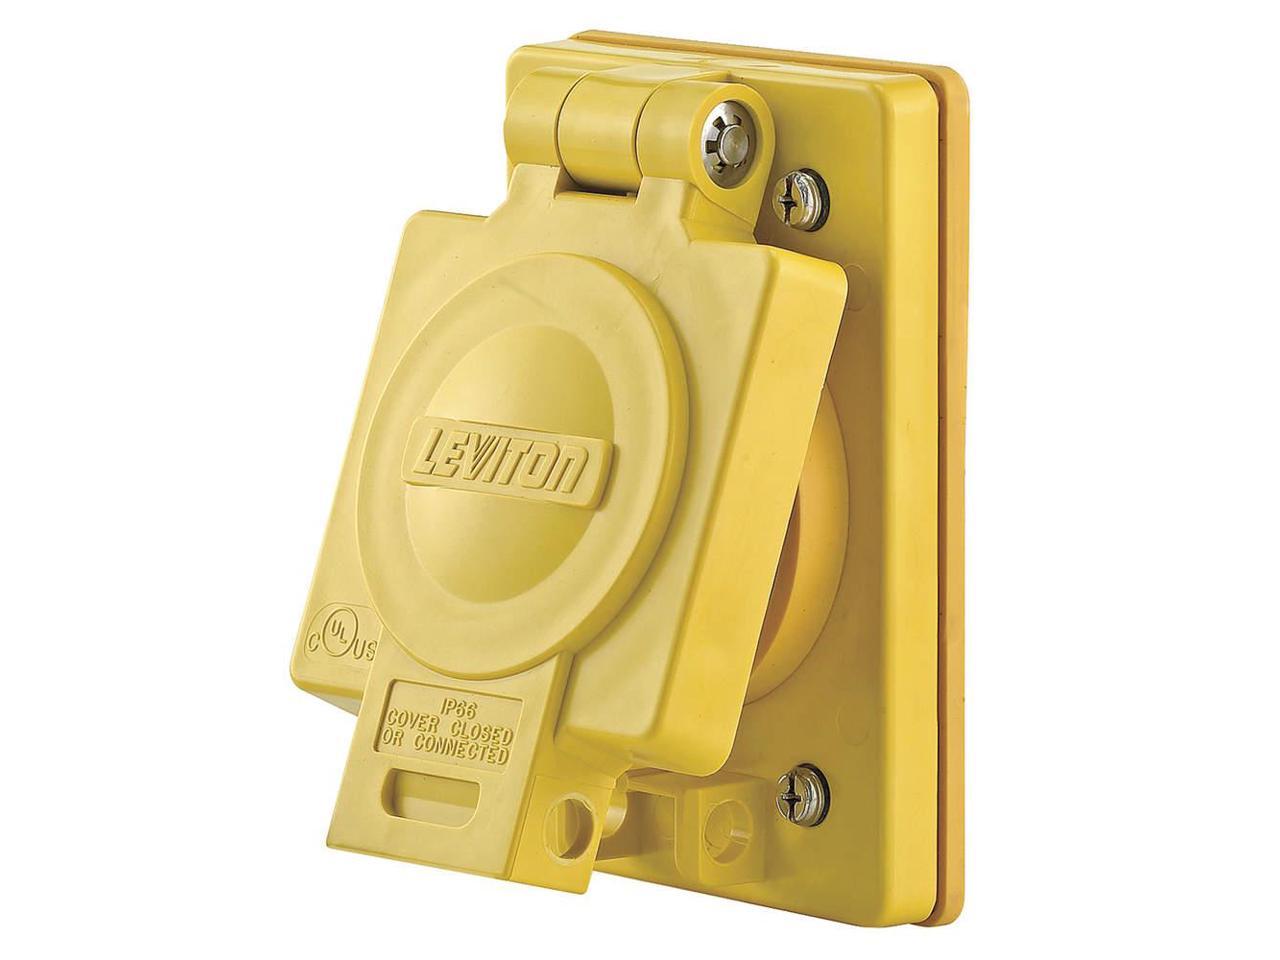 New Leviton Yellow Wetguard Flip Cover for 20A Locking Receptacle Outlets 60W04 